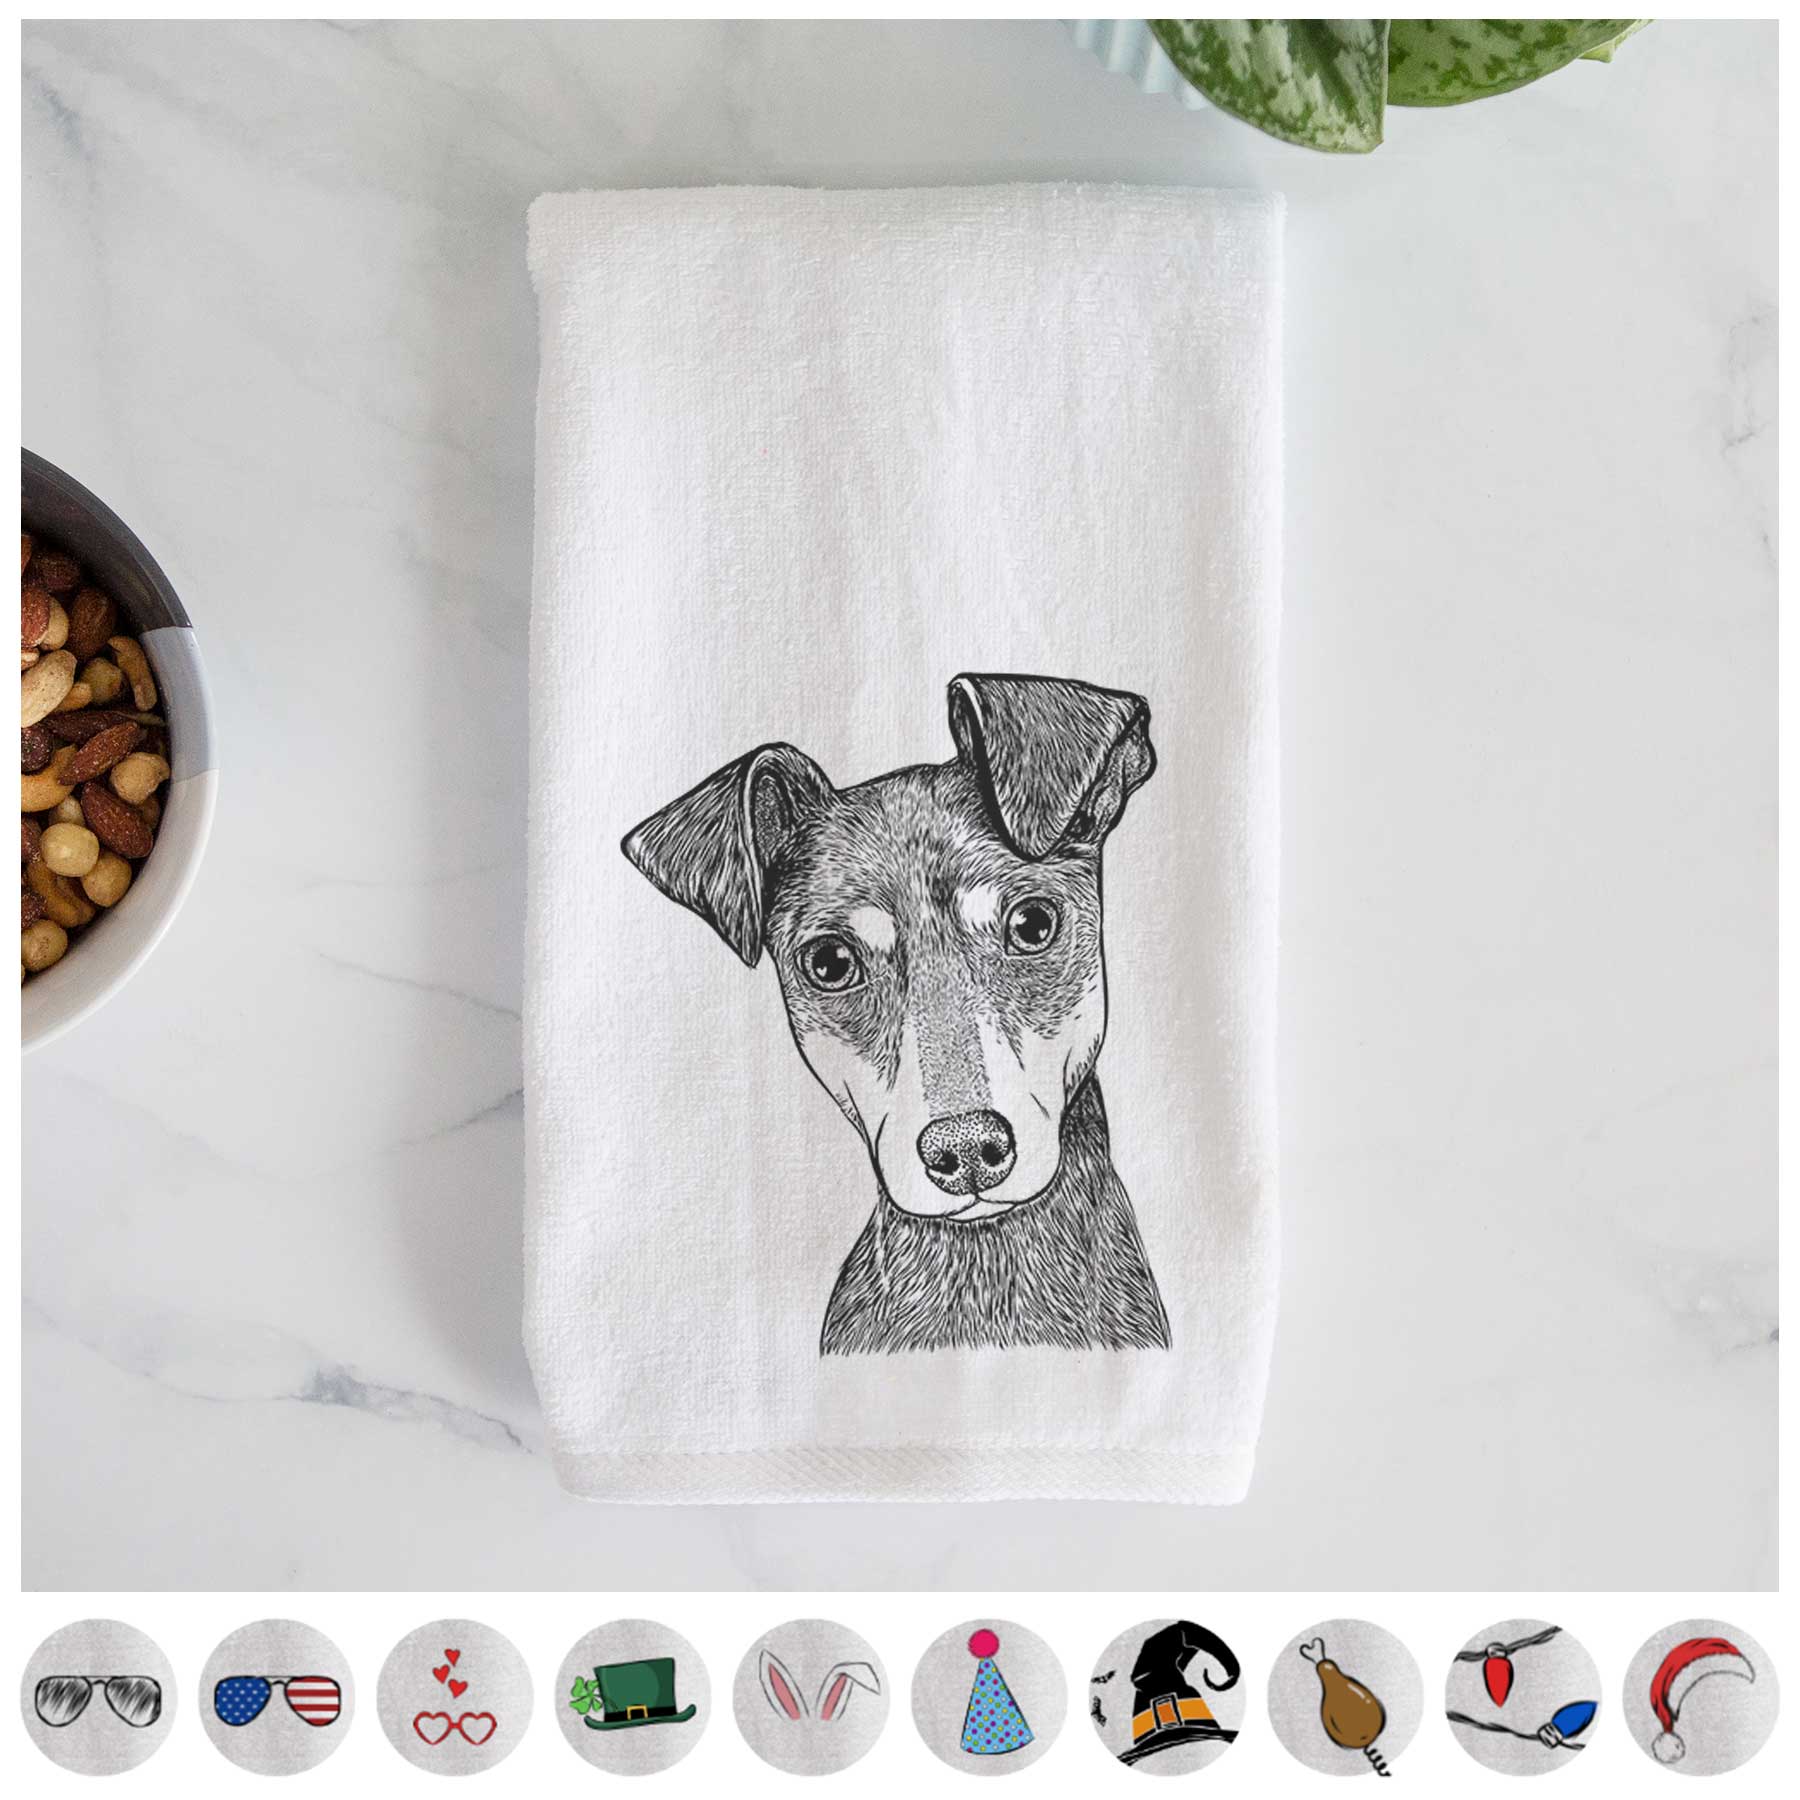 Manny the Manchester Terrier Hand Towel